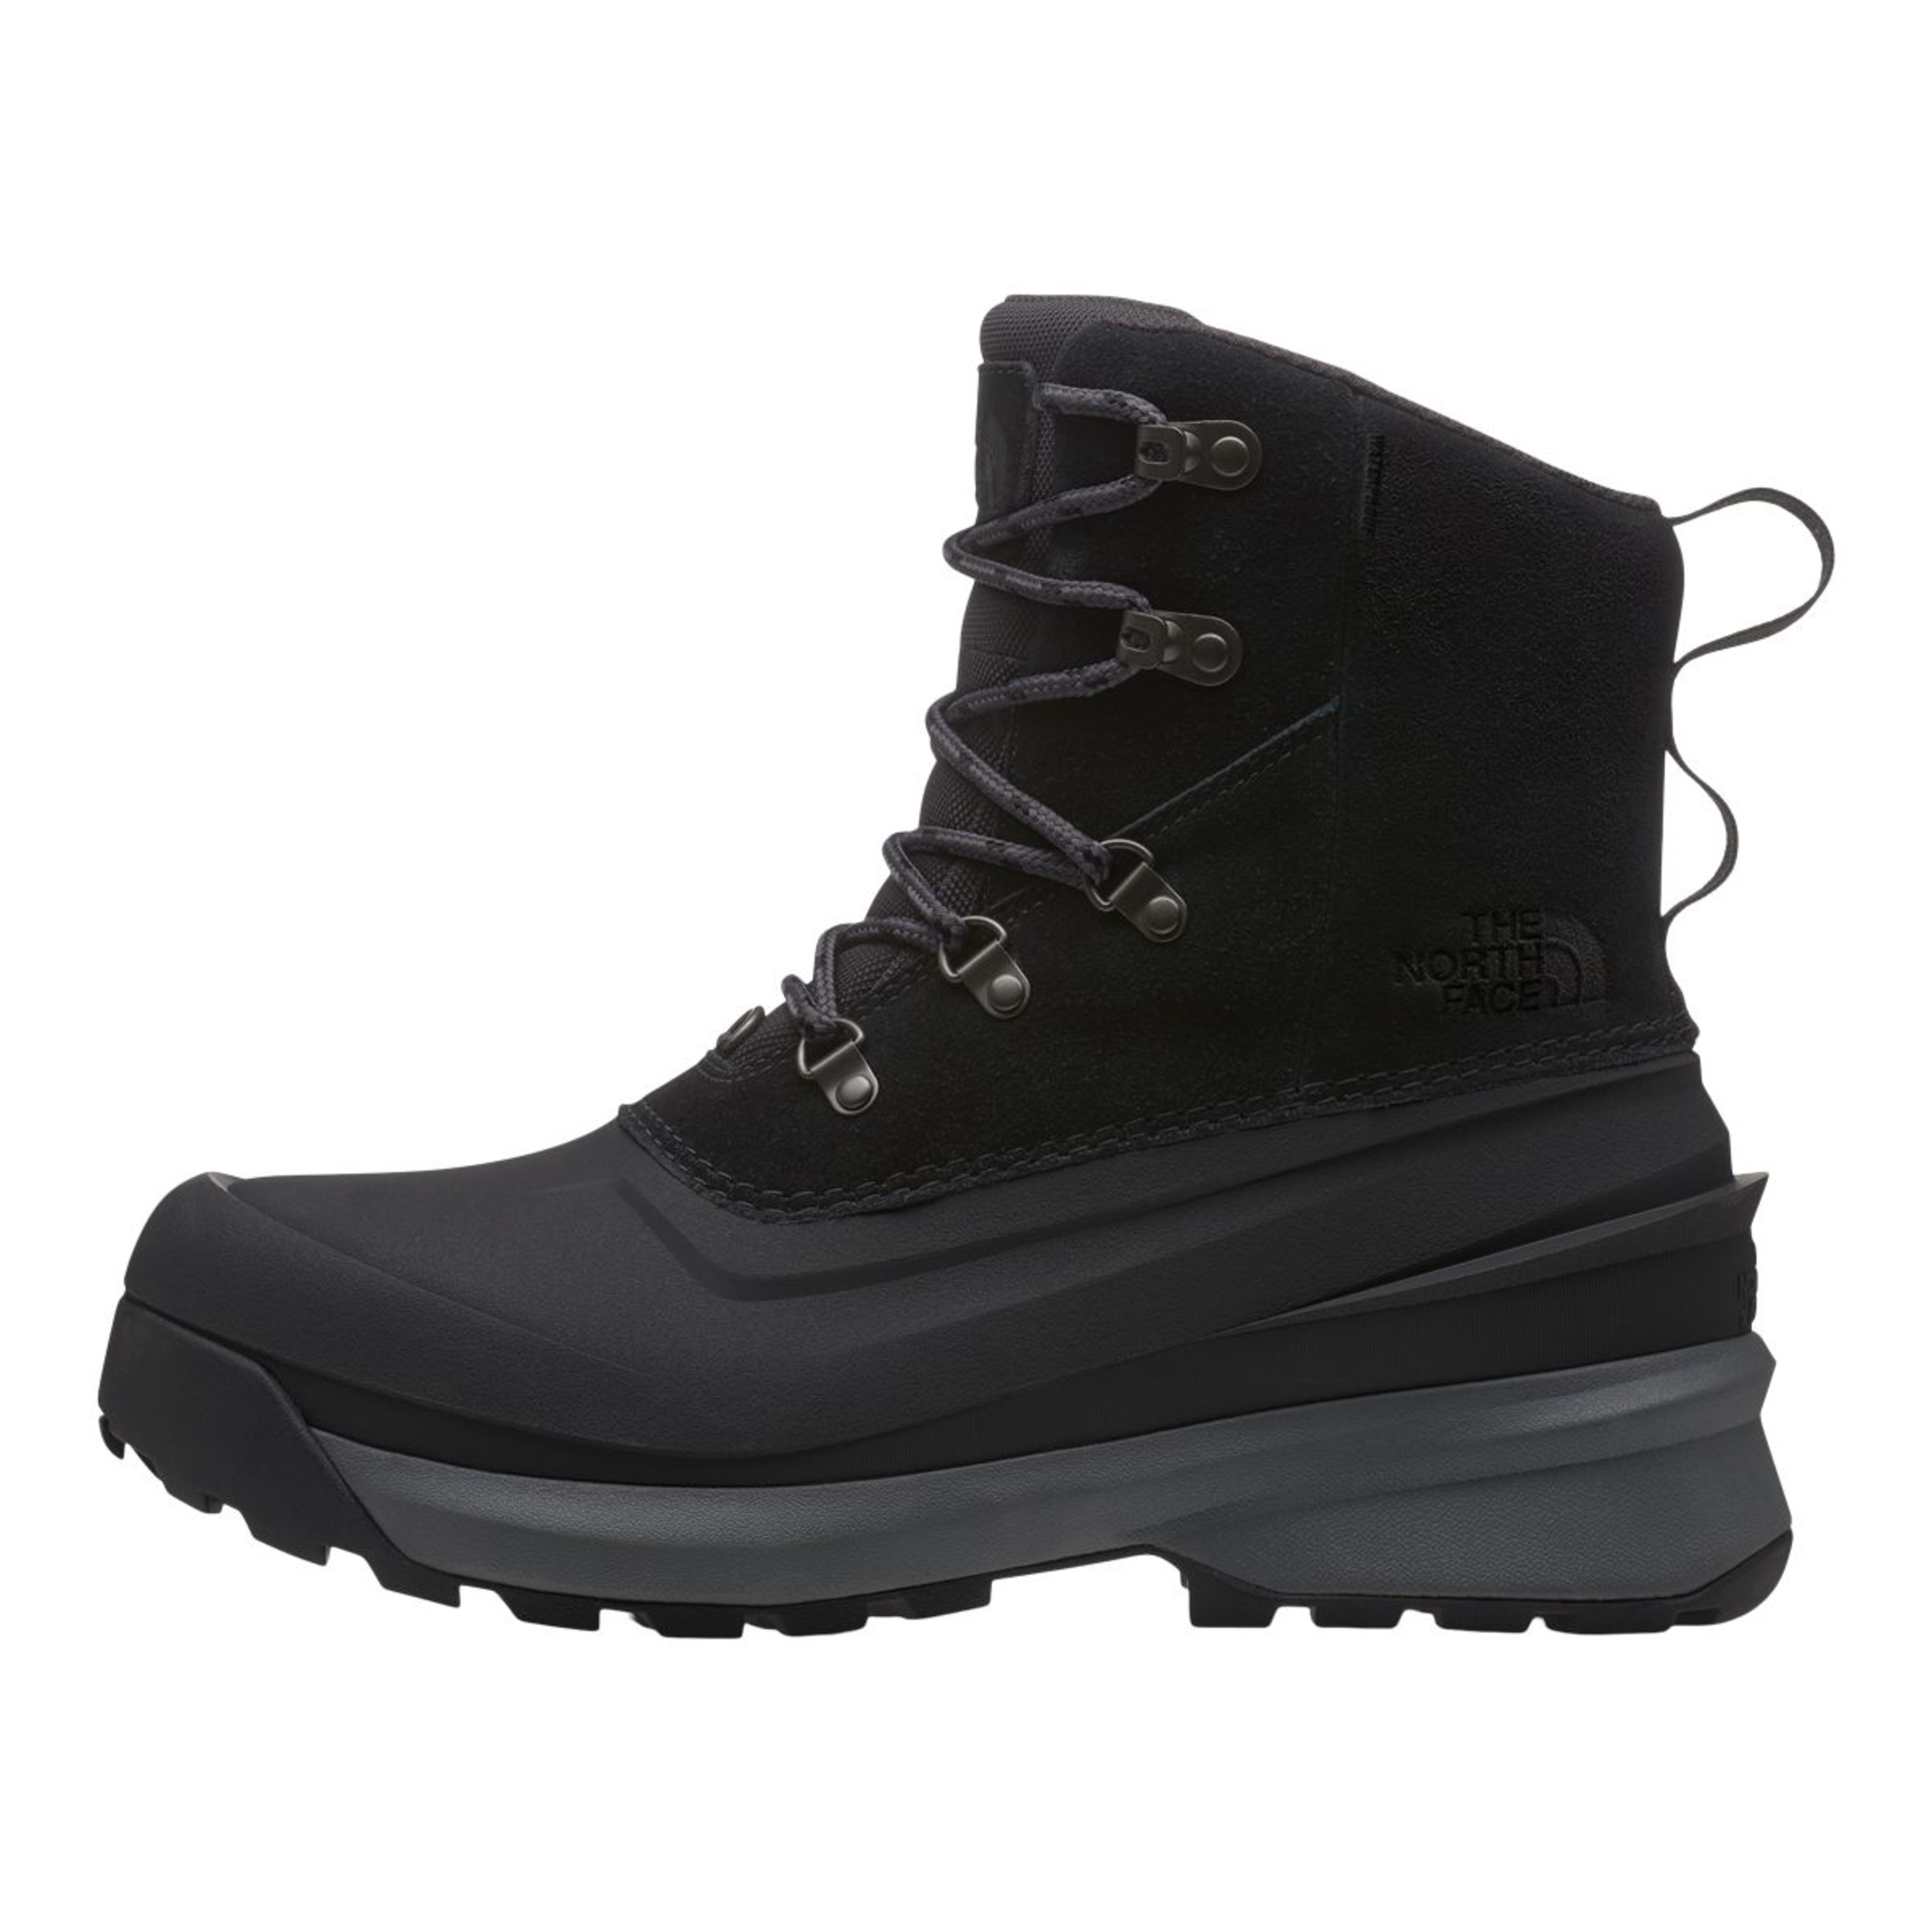 The North Face Men's Chilkat V Lace Insulated Waterproof Winter Boots ...